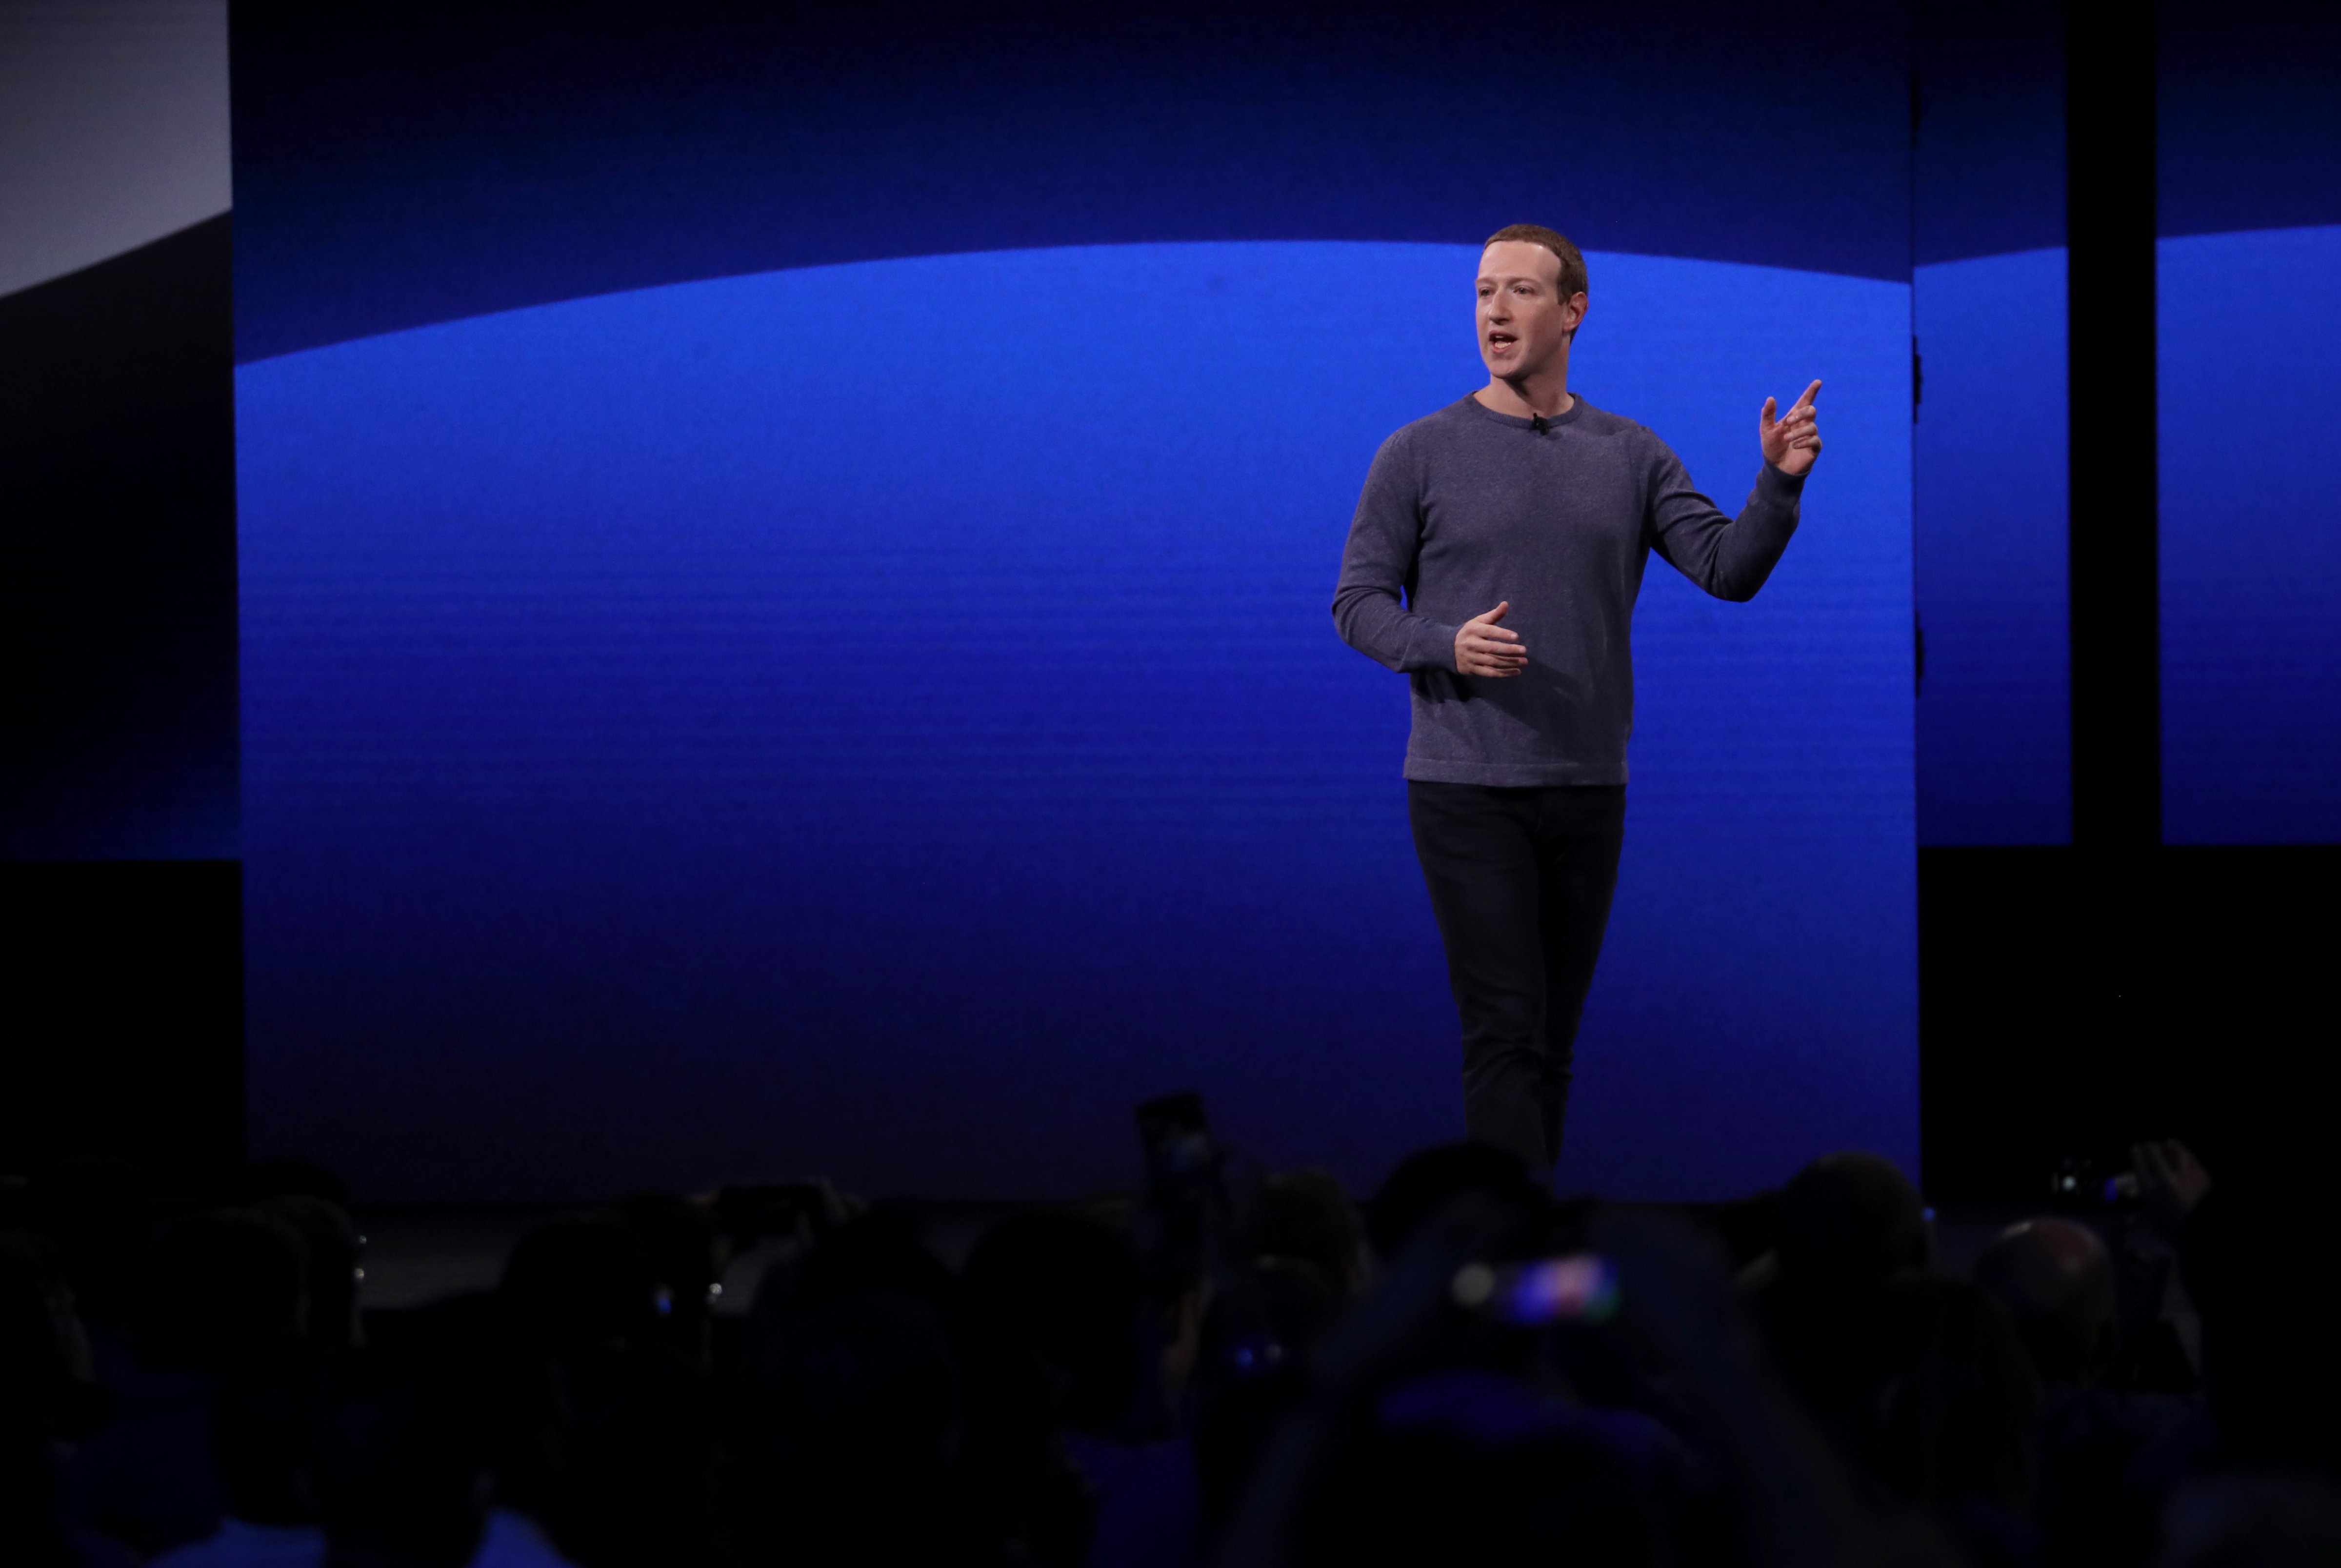 Facebook CEO Mark Zuckerberg speaks during the F8 Facebook Developers conference on April 30, 2019 in San Jose, California. (Justin Sullivan—Getty Images)